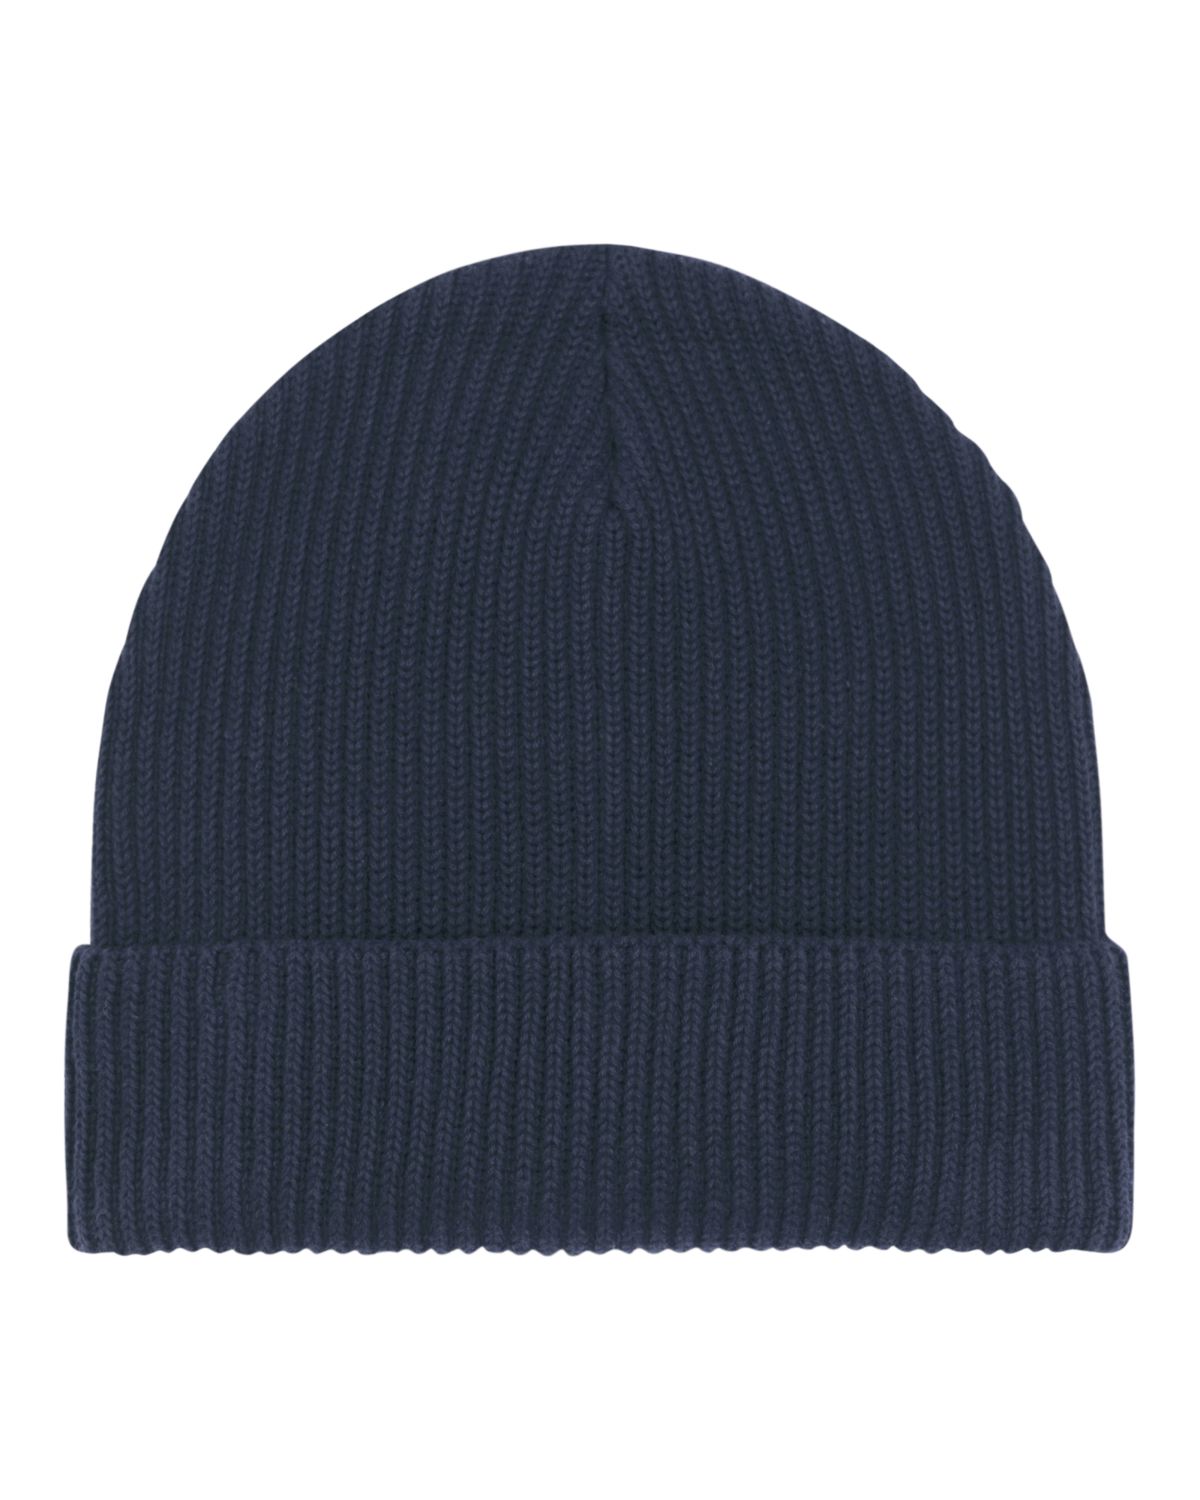 Customize your own sustainable beanie hat made of 95% GOTS-Certified organic cotton.